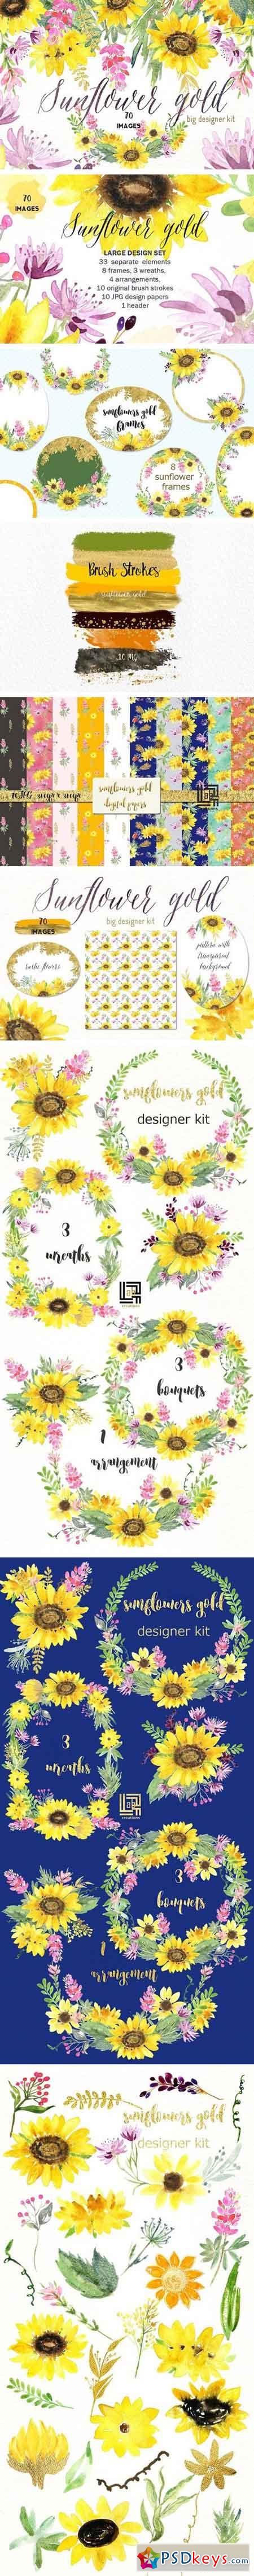 Sunflowers gold Watercolor clipart 1522351